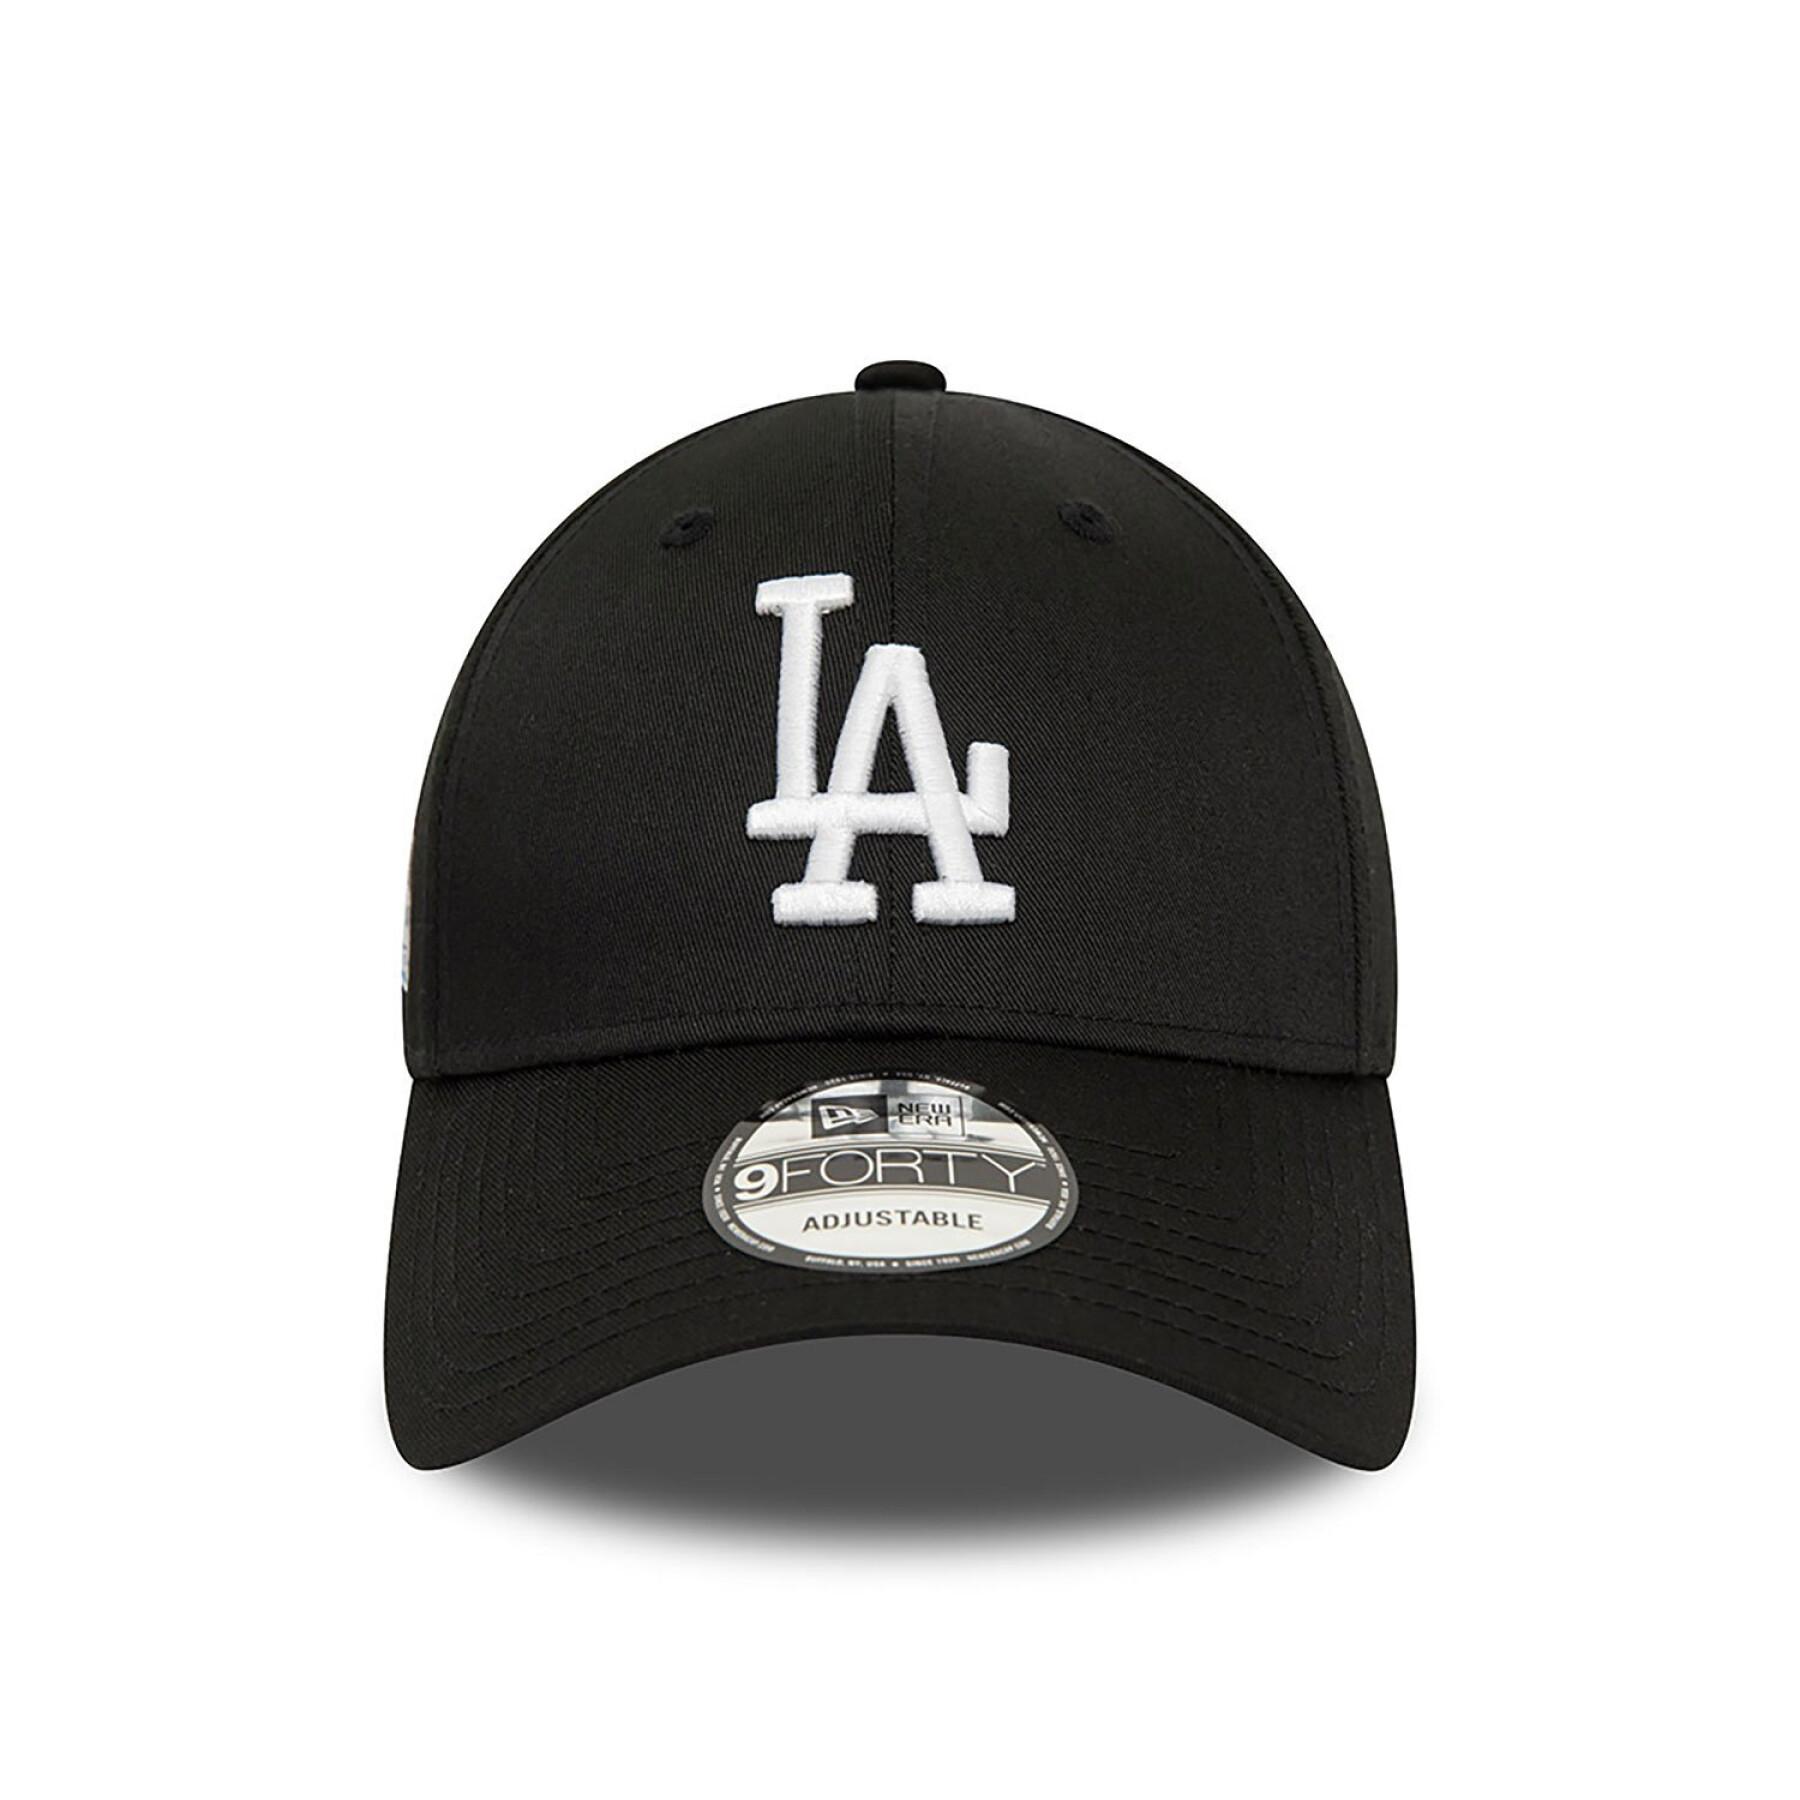 Cap 9forty Los Angeles Dodgers Patch